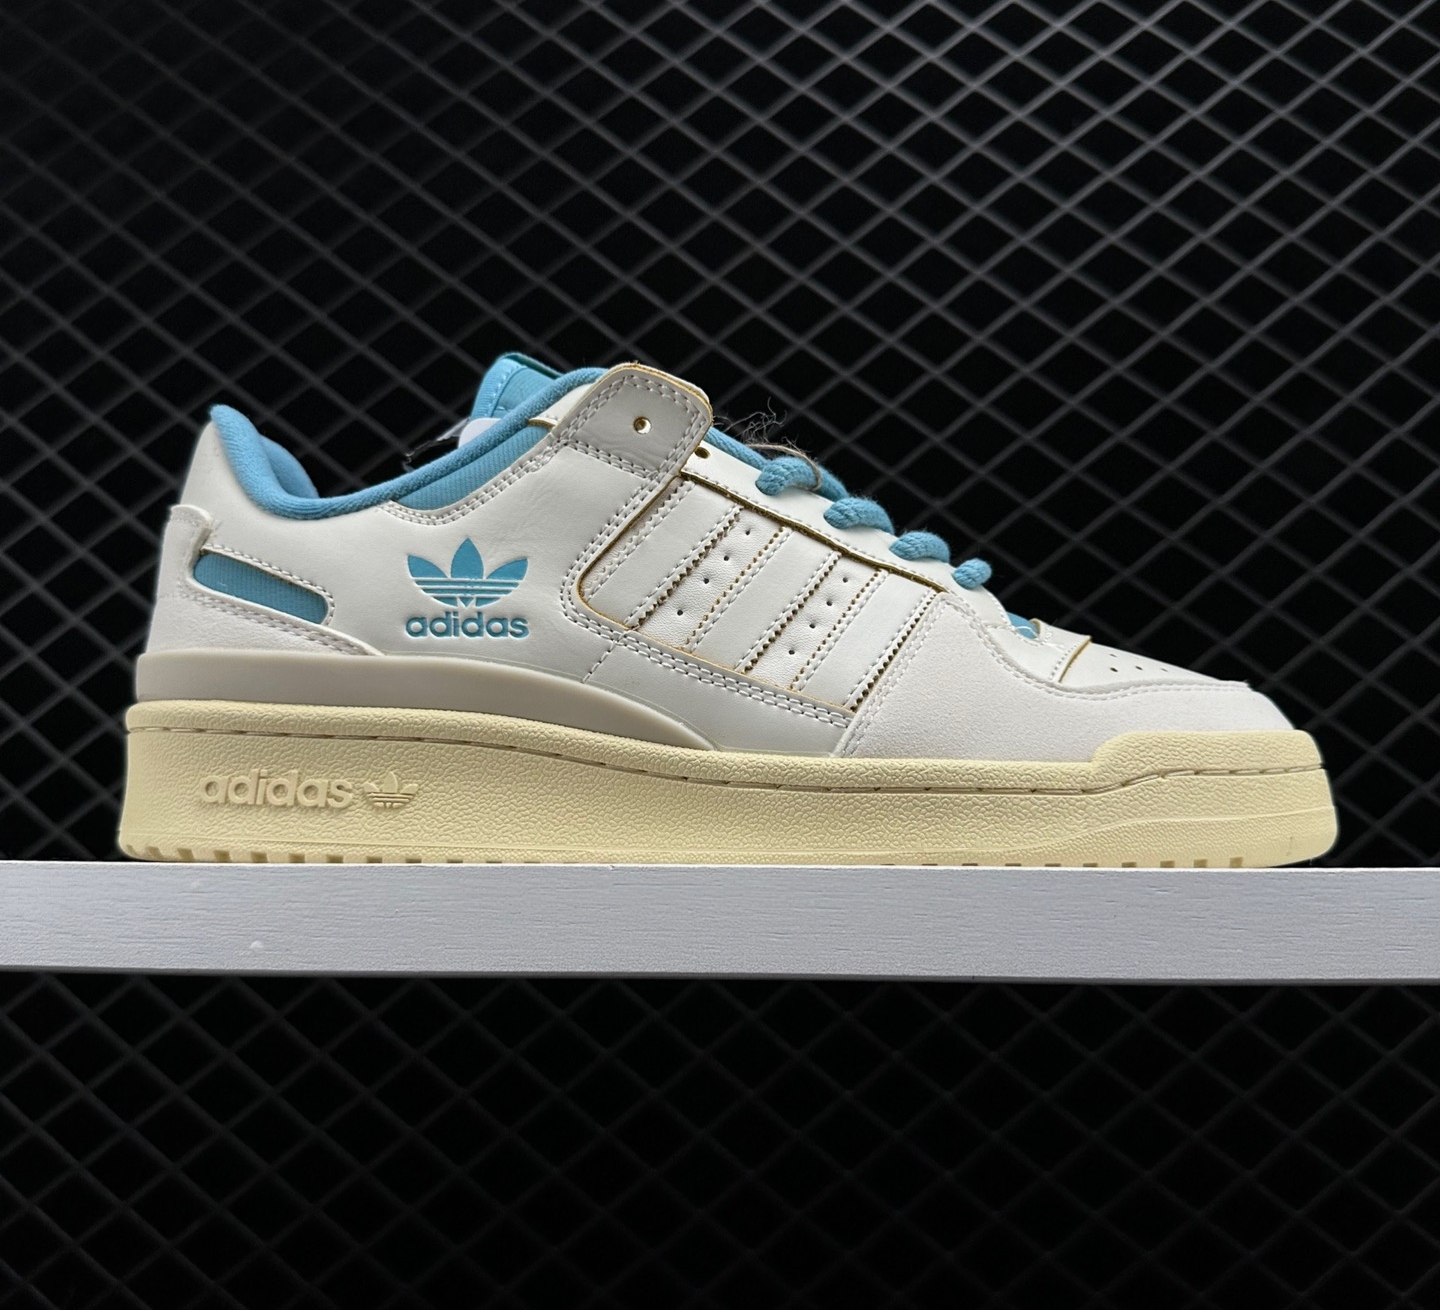 Adidas Originals FORUM 84 Low CL 'Off White' FZ6342 - Stylish and Timeless Sneakers